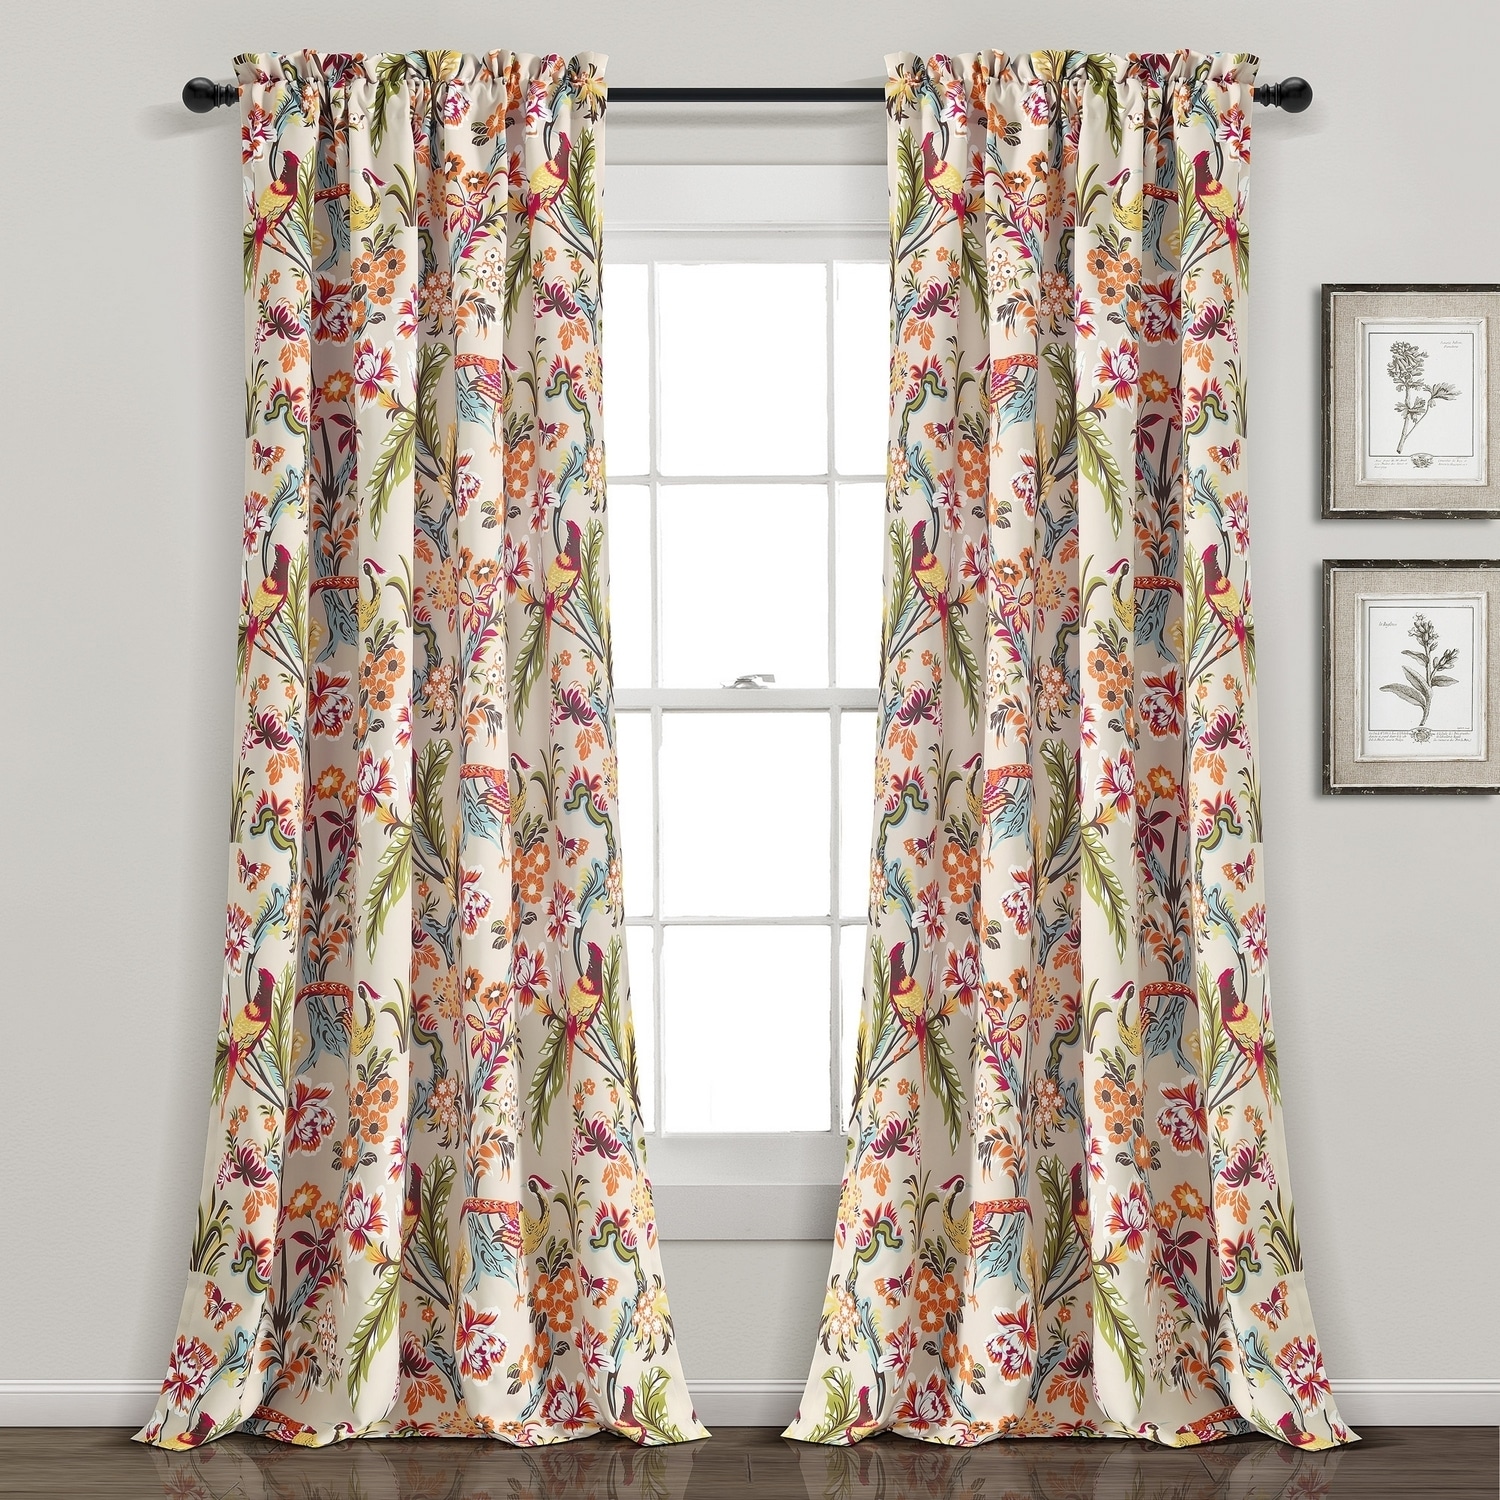 Light in Filtering Lush the department Pair Curtains Decor Panel at Rod Pocket Drapes 84-in Neutral Curtain &